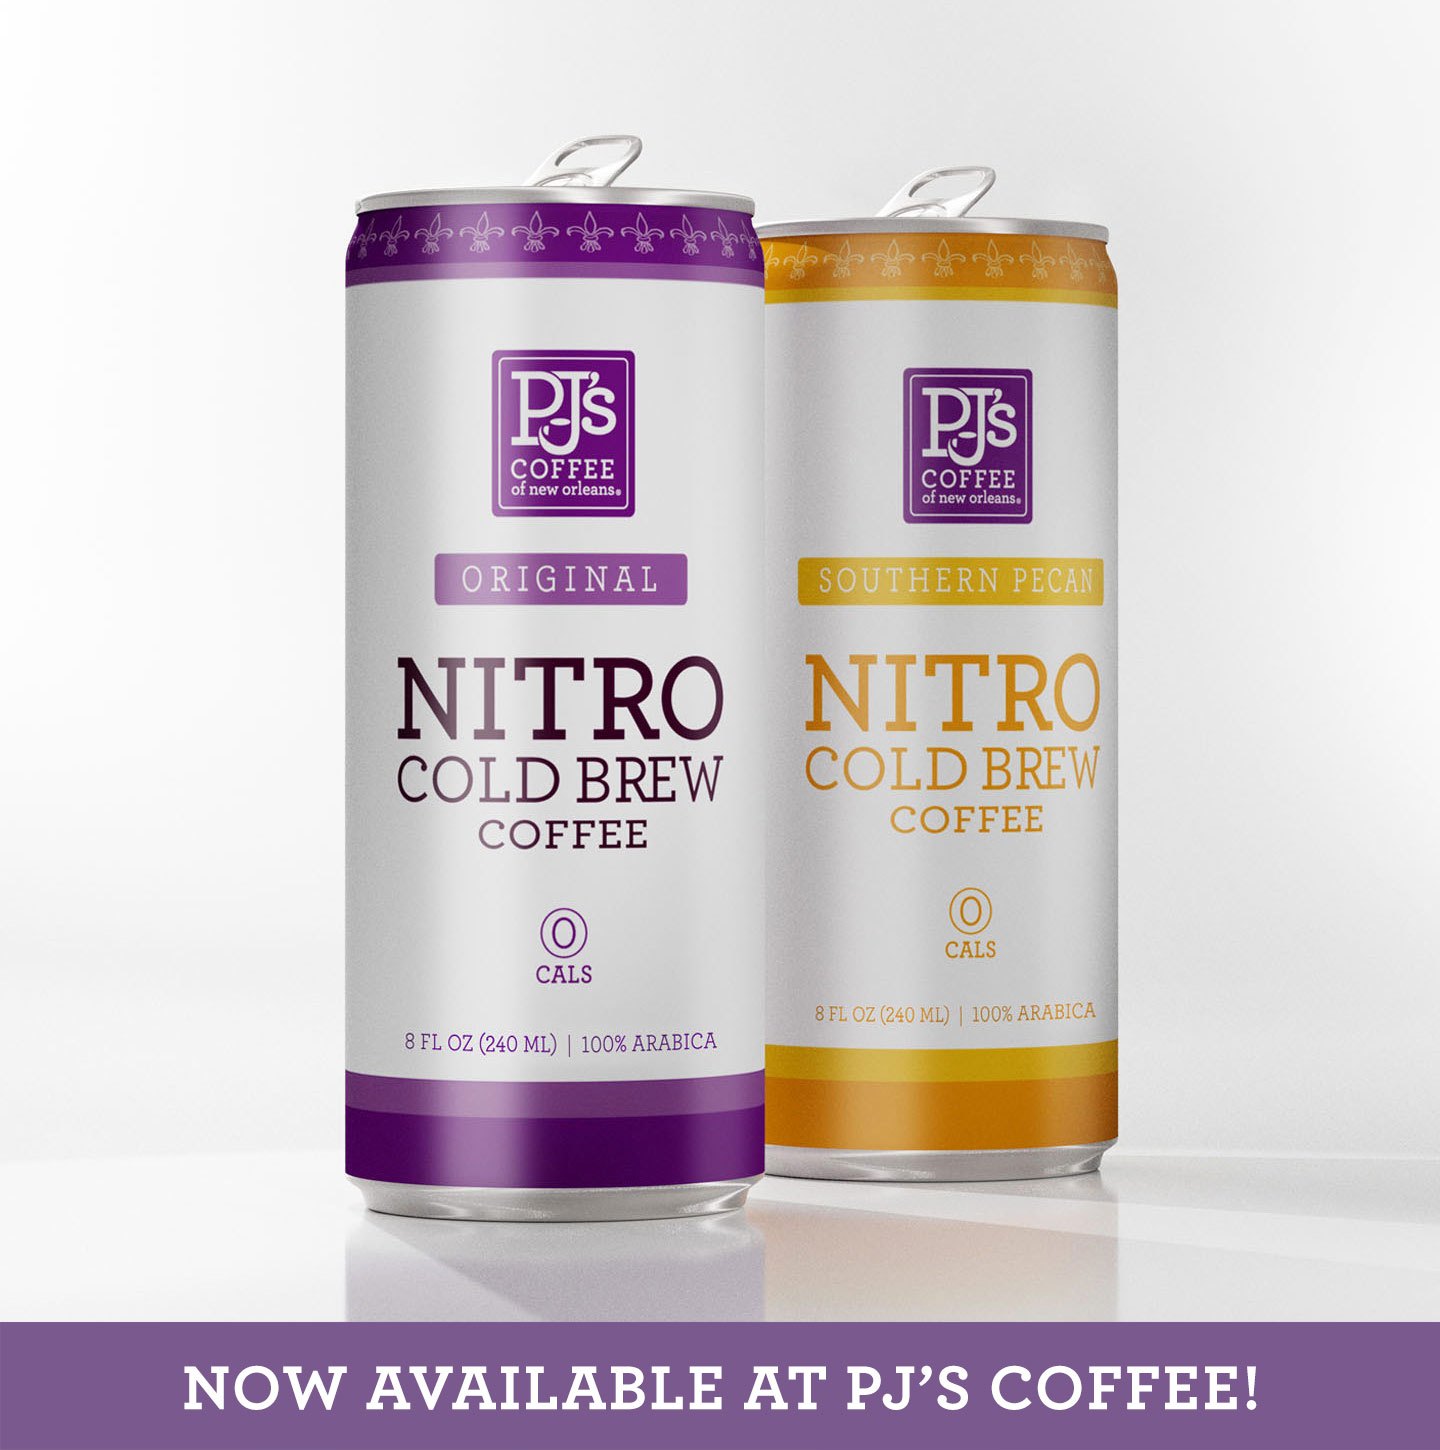 Photo of Nitro Cold Brew Cans with Now Available at PJ's Coffee